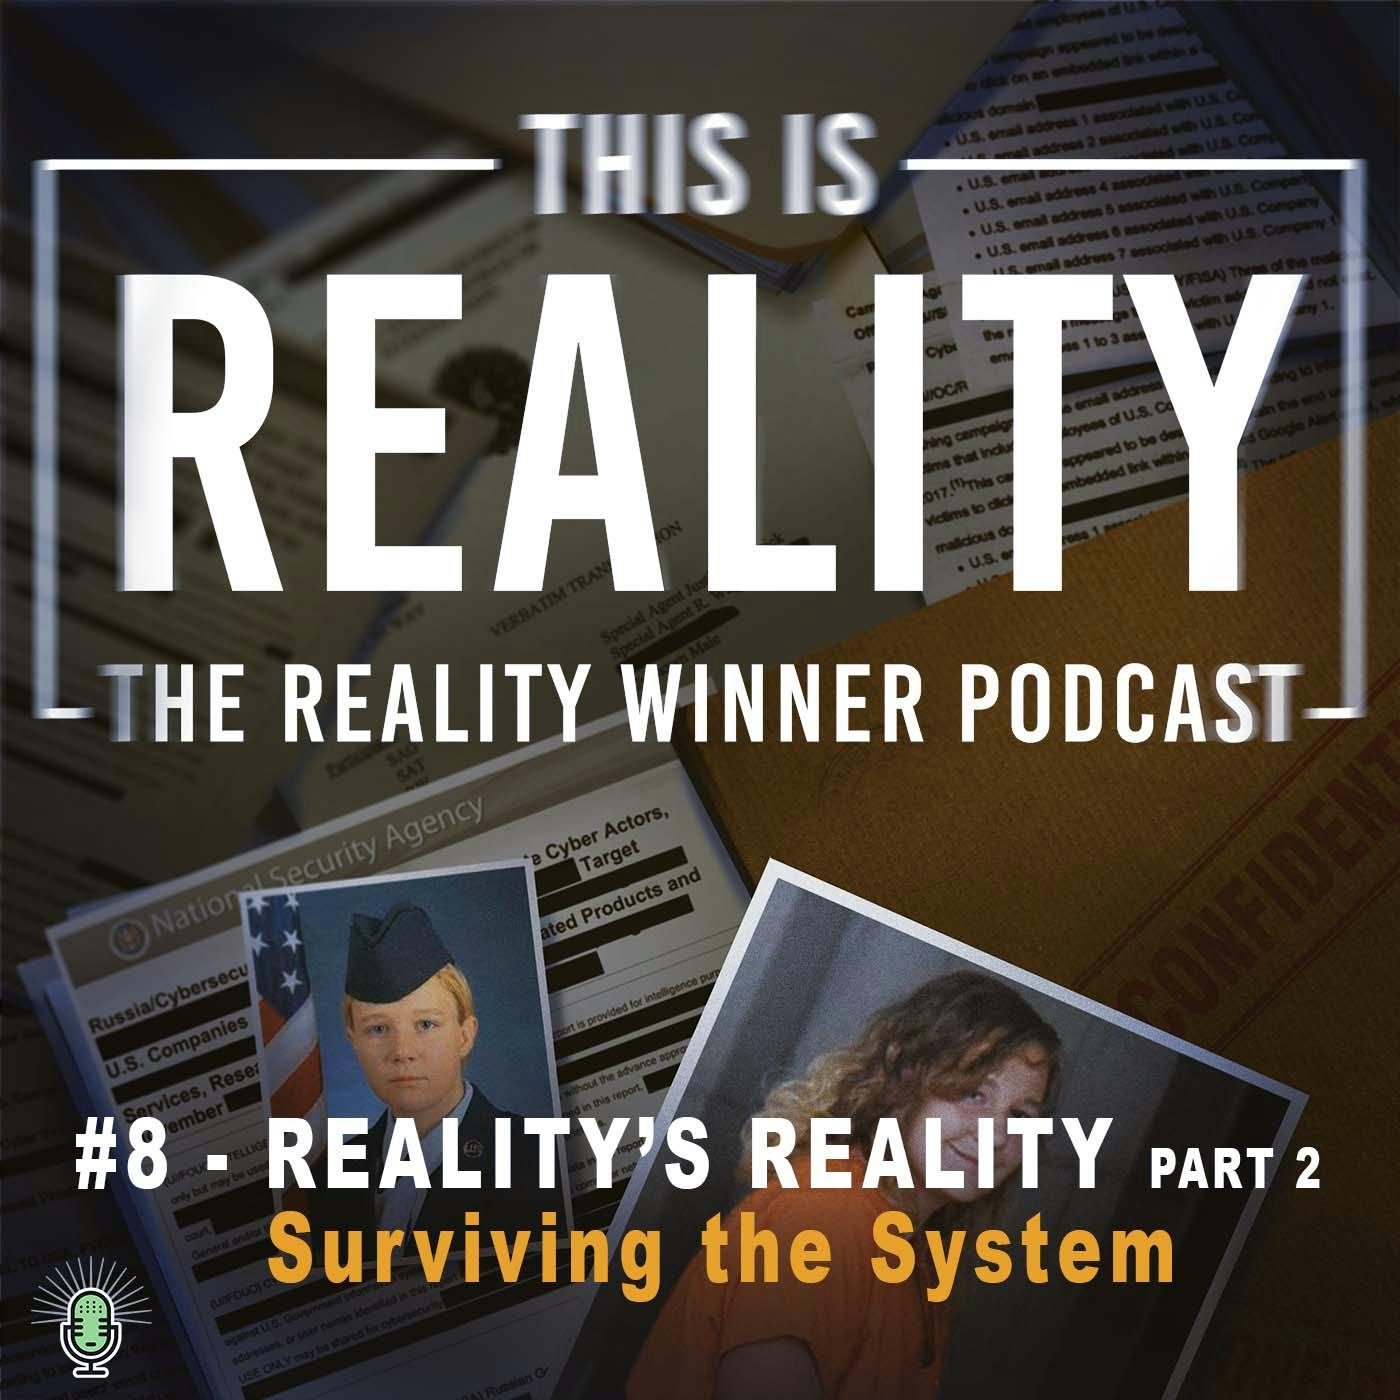 #8 - REALITY'S REALITY (Part 2): Surviving the System